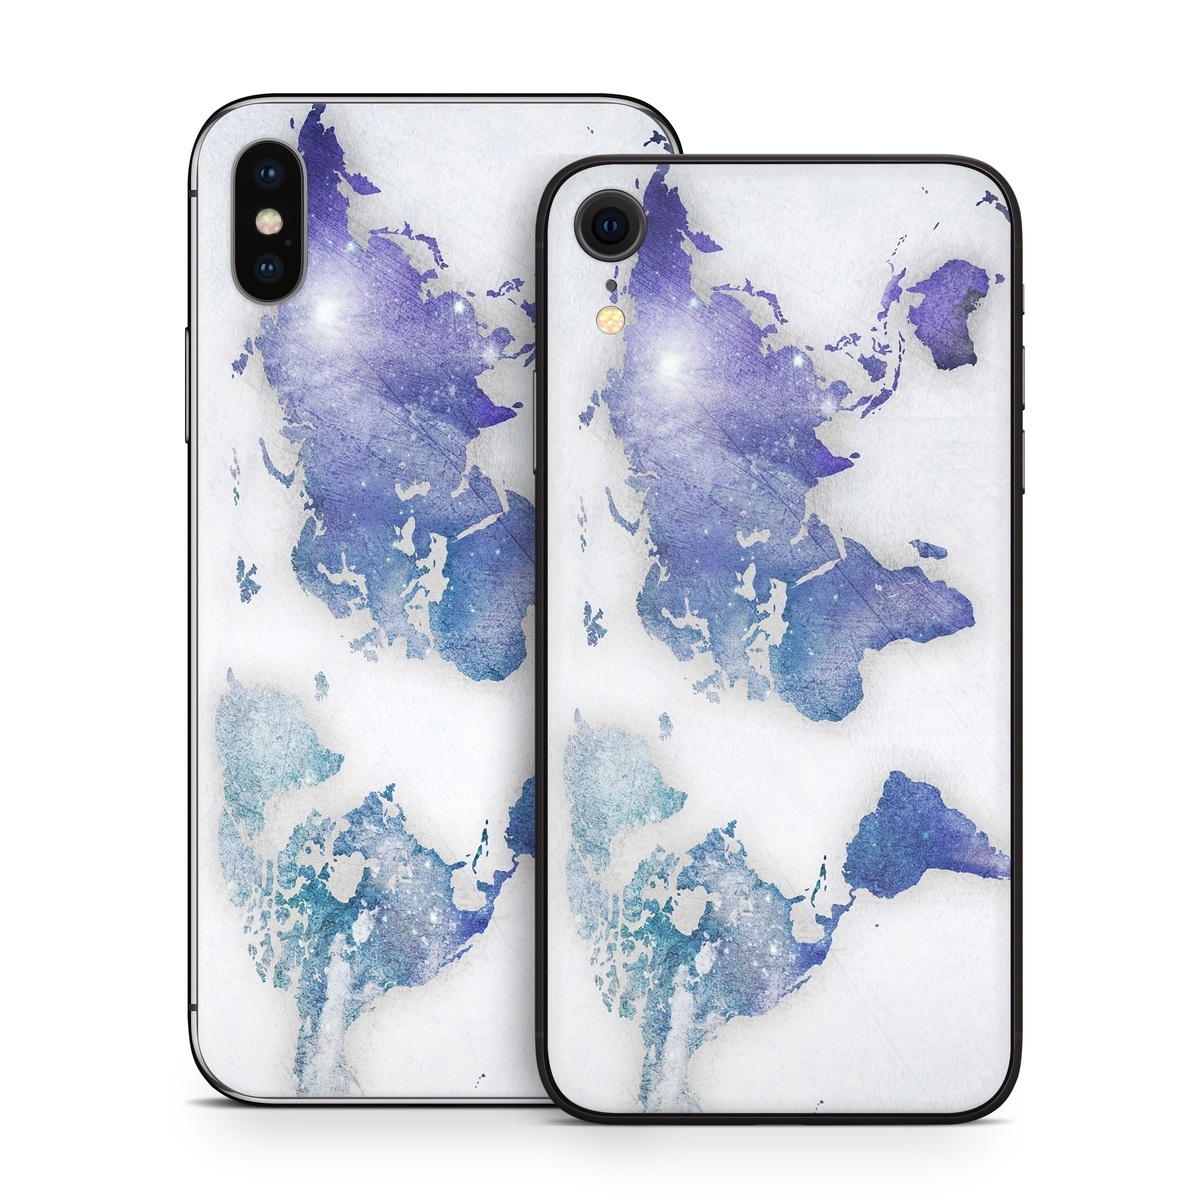 iPhone XS Skin design of World, Map, Watercolor paint, Illustration, with white, blue, purple colors